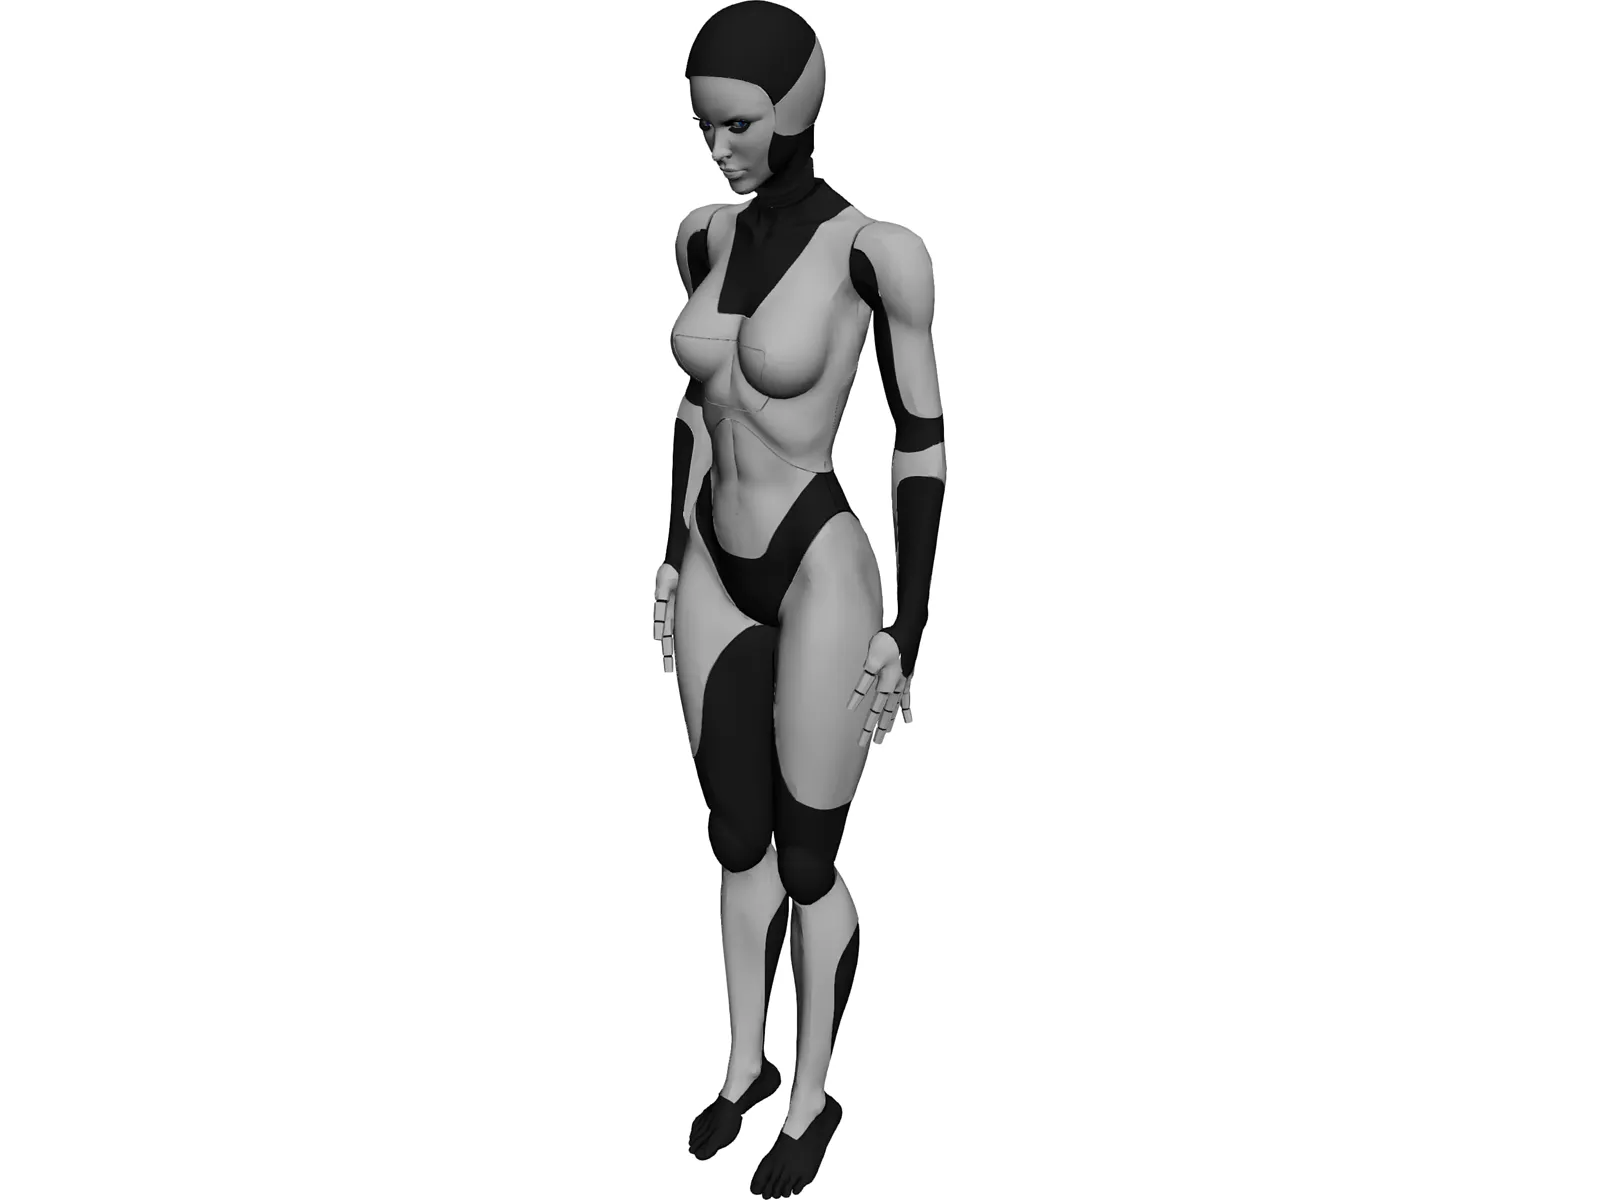 Female Android 3D Model